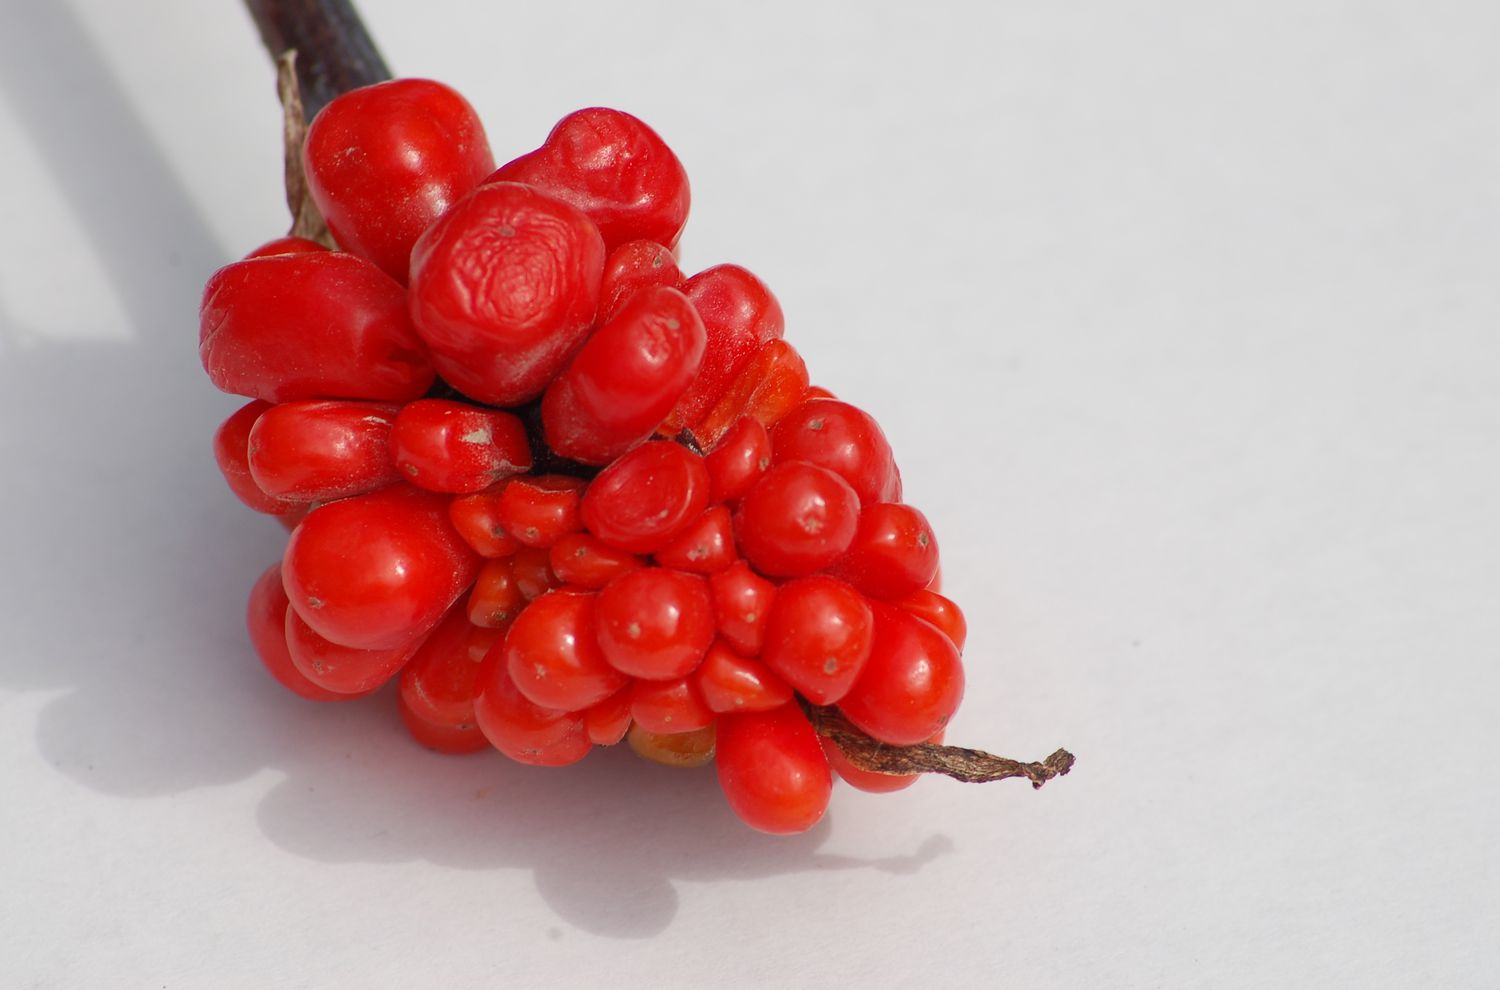 jack-in-the-pulpit berries